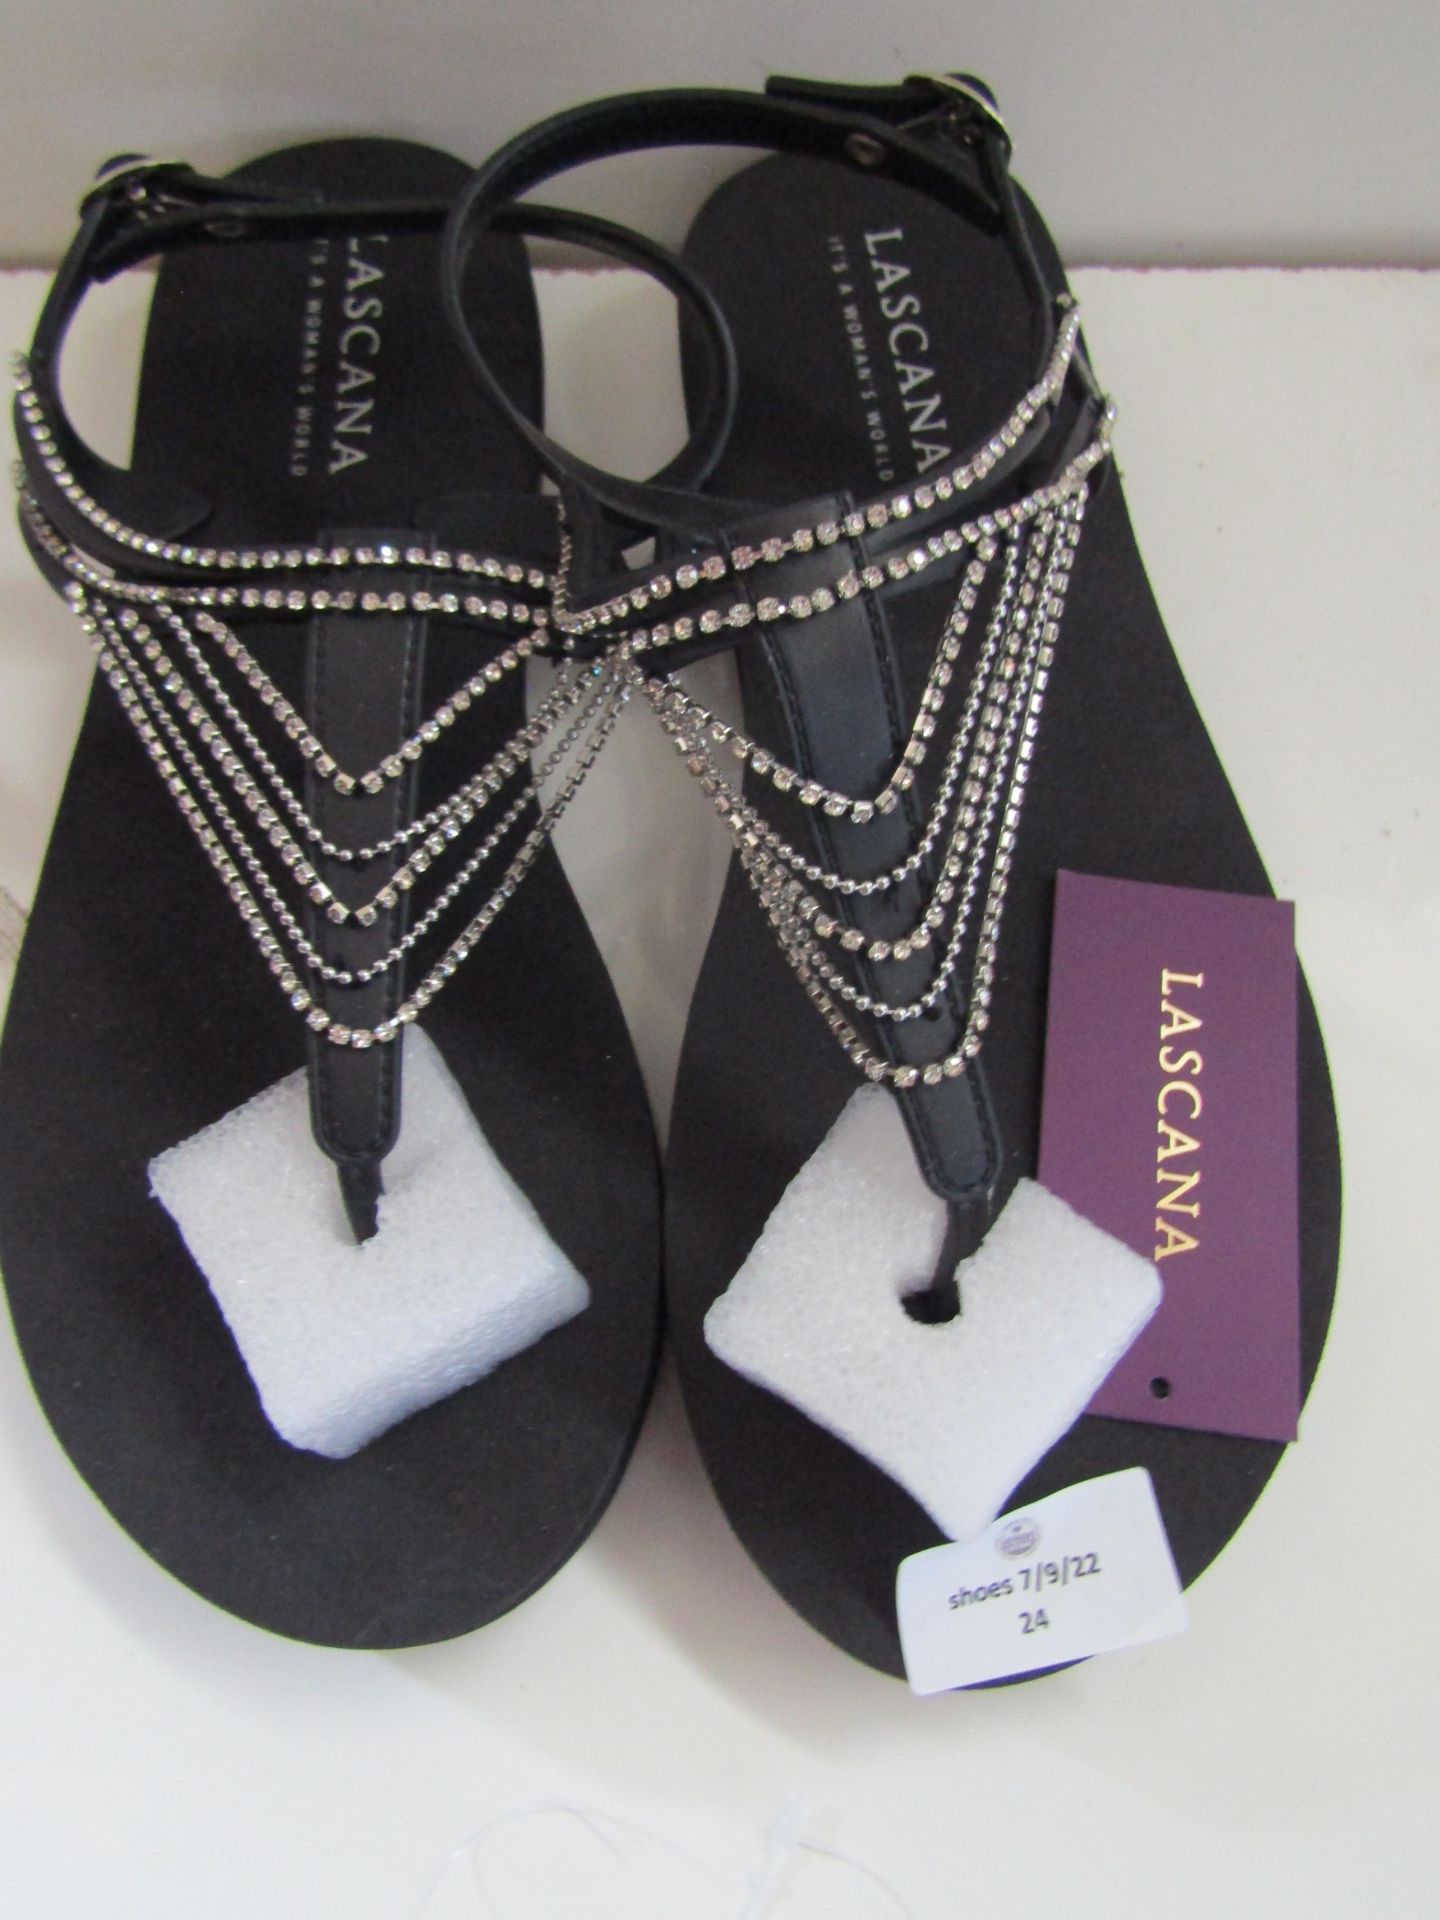 Lascana Flip Flop With Diamanti Design Black Size 40 New & Packaged - Image 3 of 3